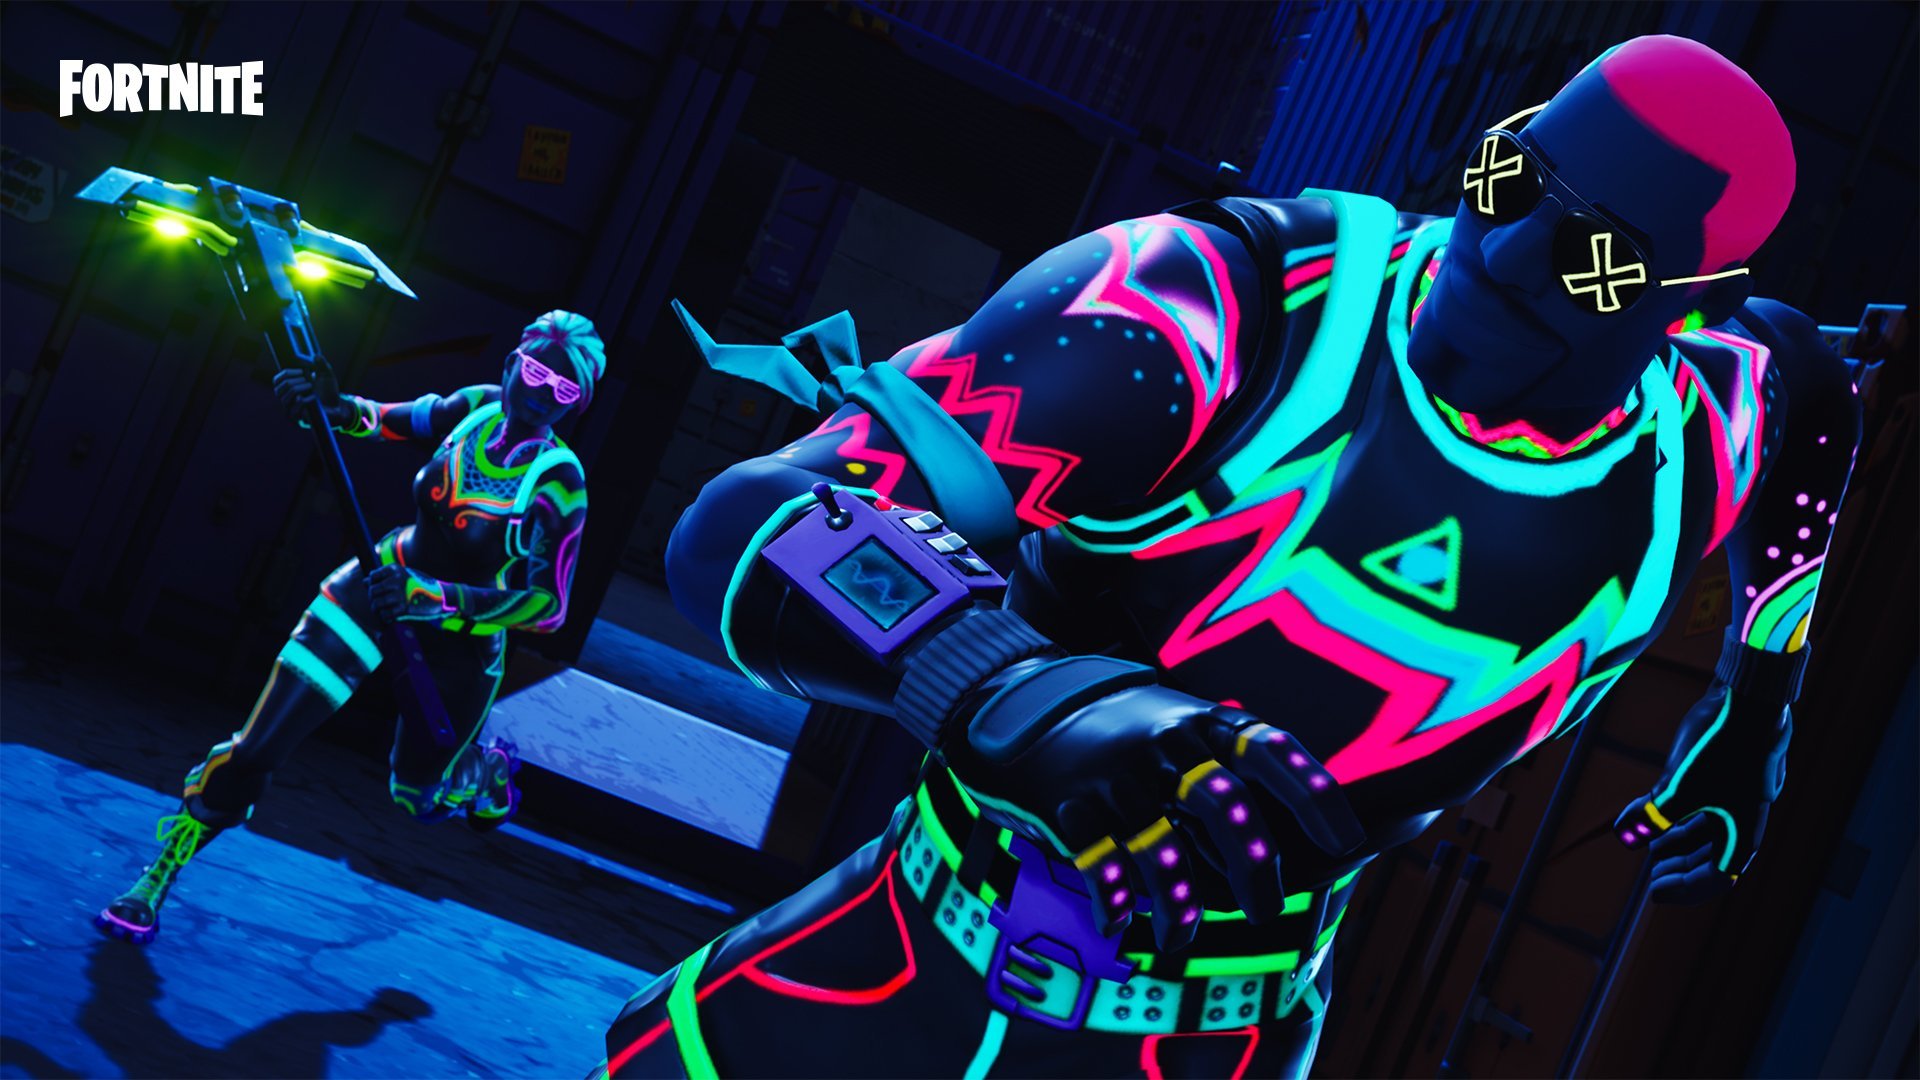 Fortnite New Skin Liteshow Outfit HD Wallpaper Background Image